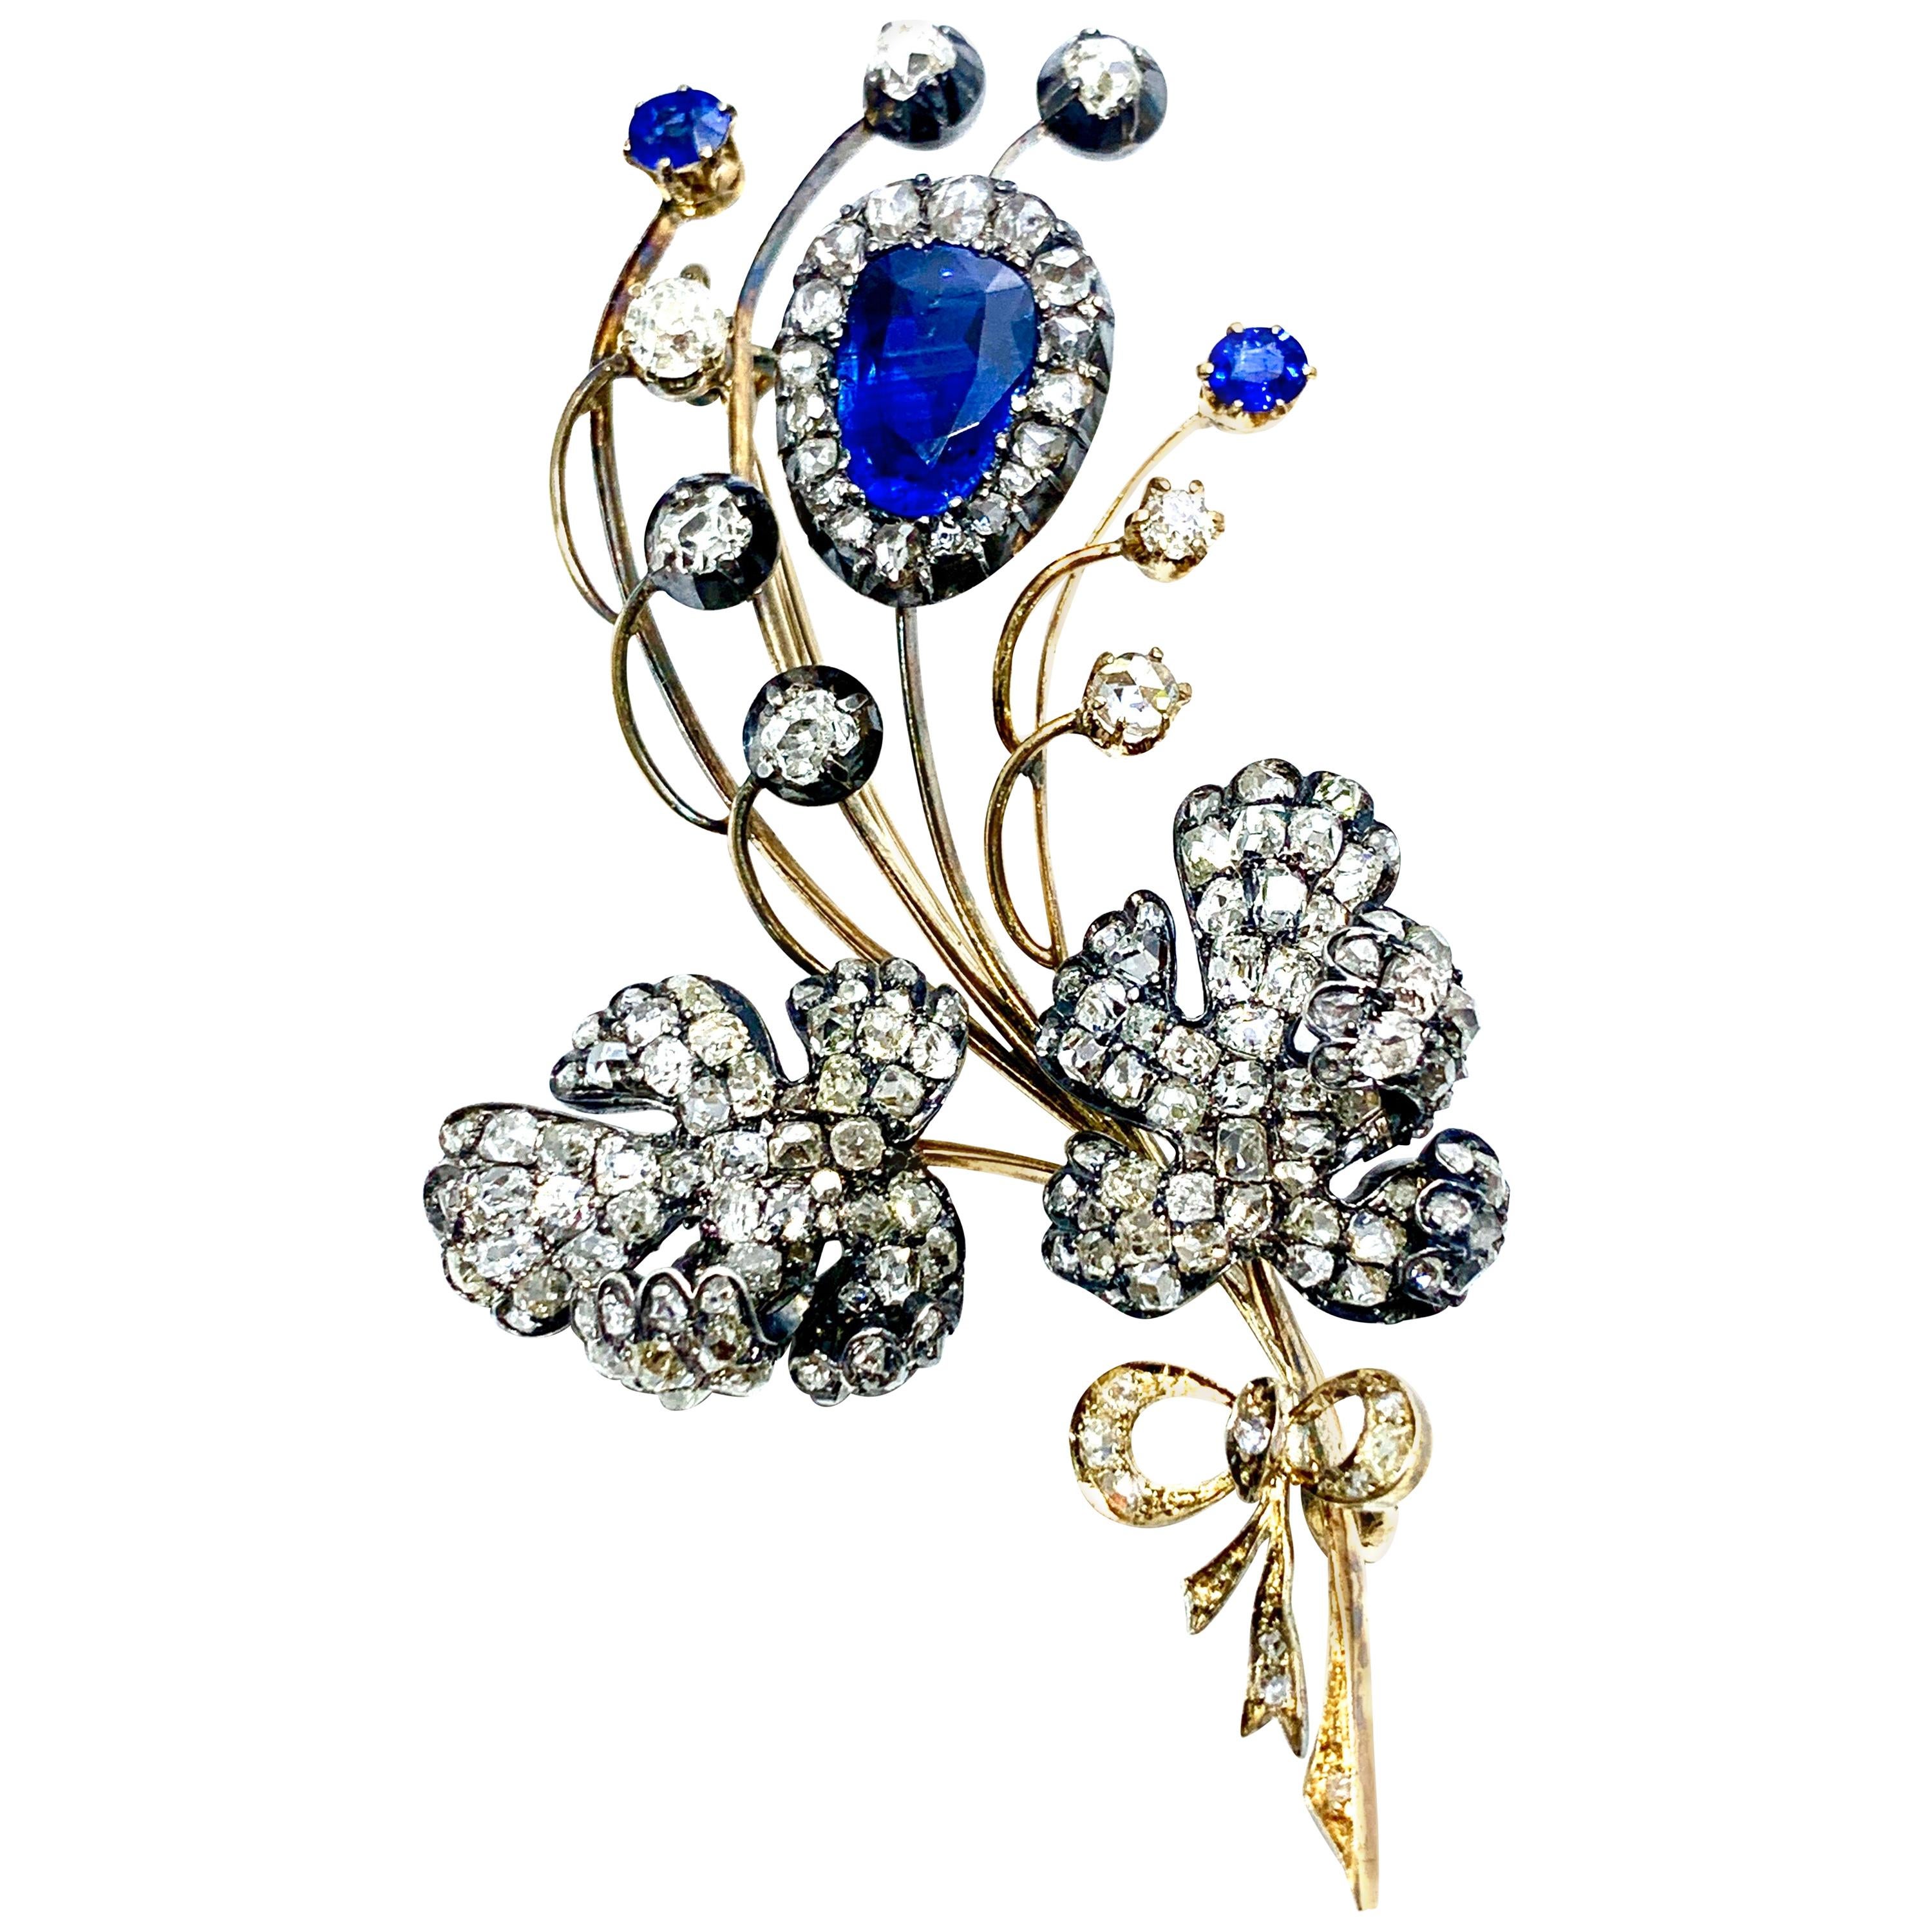 Edwardian 3.02 Carat Pear Shape Sapphire and Diamond Silver over Gold Bouquet